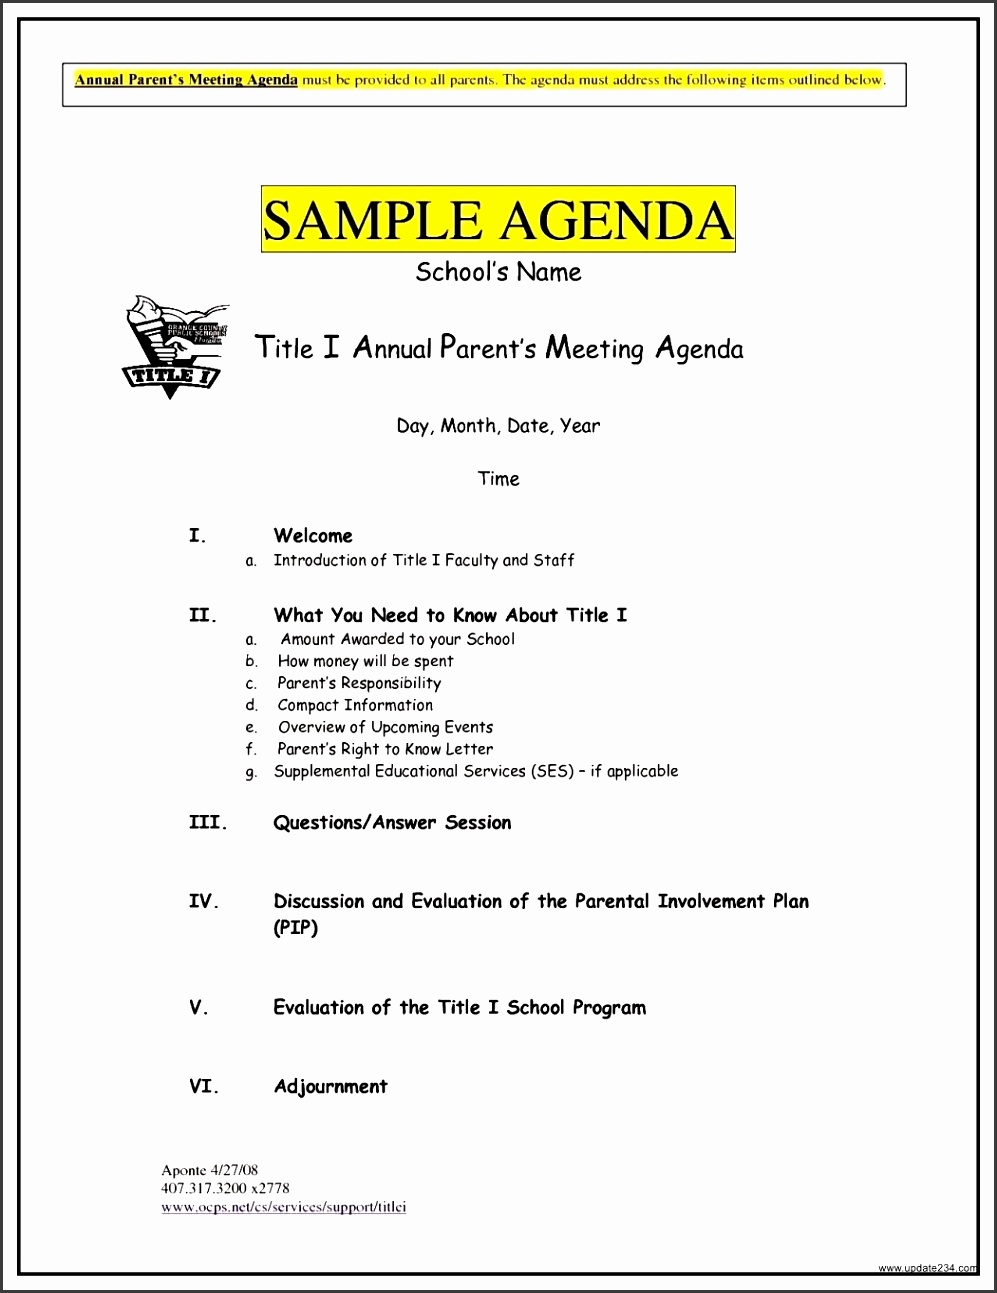 Meeting Agenda Template Word Ms fice Templates Microsoft Format Free Agenda an image part of